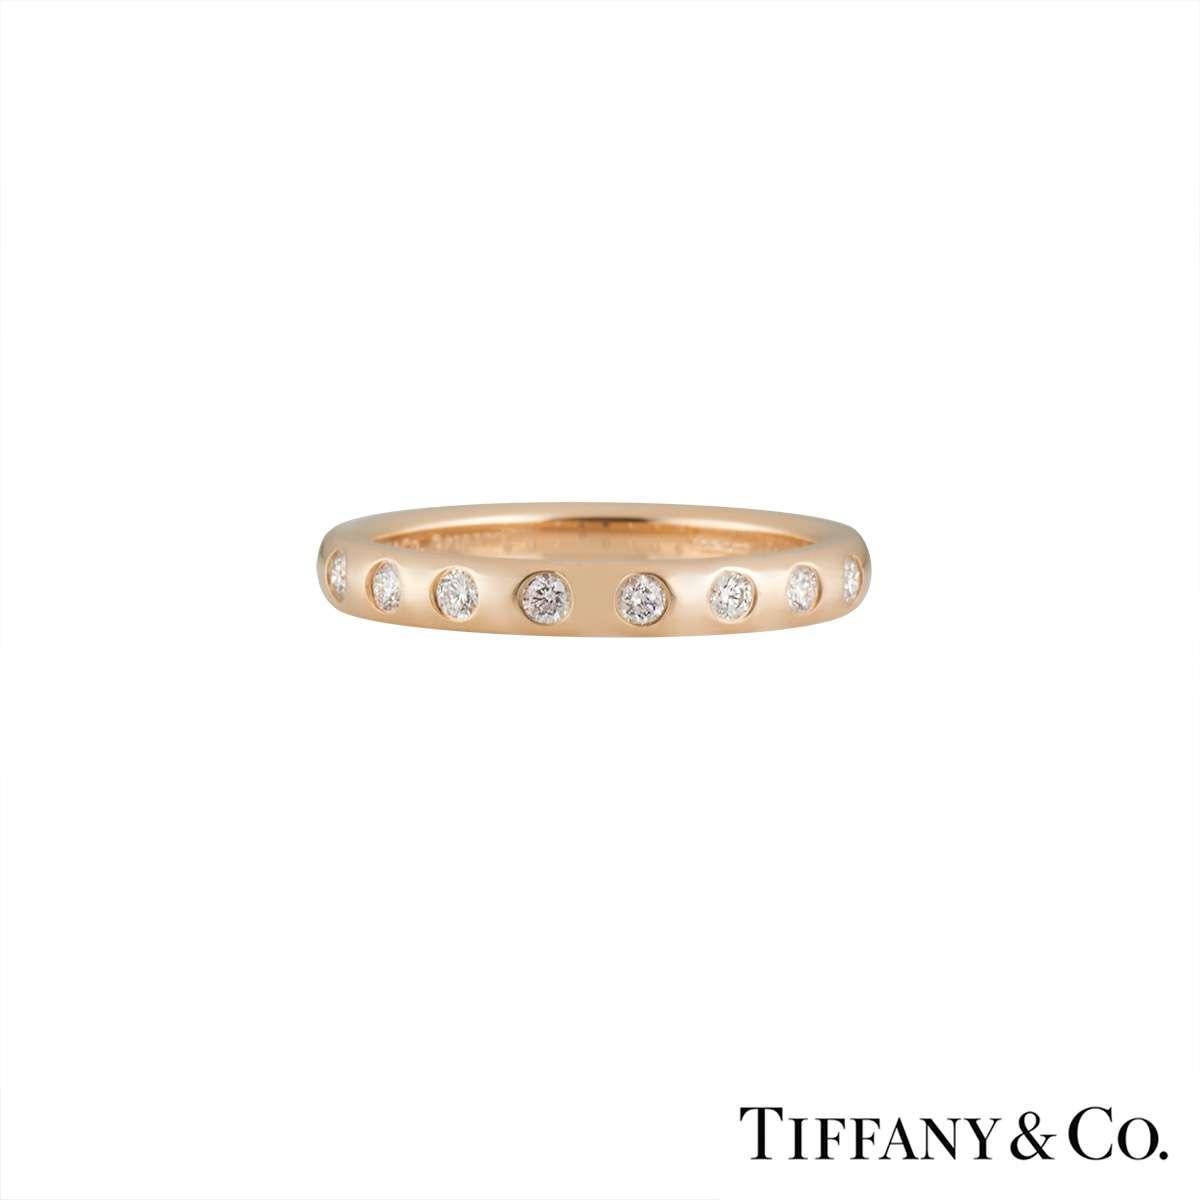 A delicate Tiffany & Co 18k rose gold stacking band from the Elsa Peretti collection. This ring has 8 round brilliant cut diamonds set across the front of the band totalling 0.16ct. This ring is currently a size UK L/US 5.5/EU51 but can be adjusted